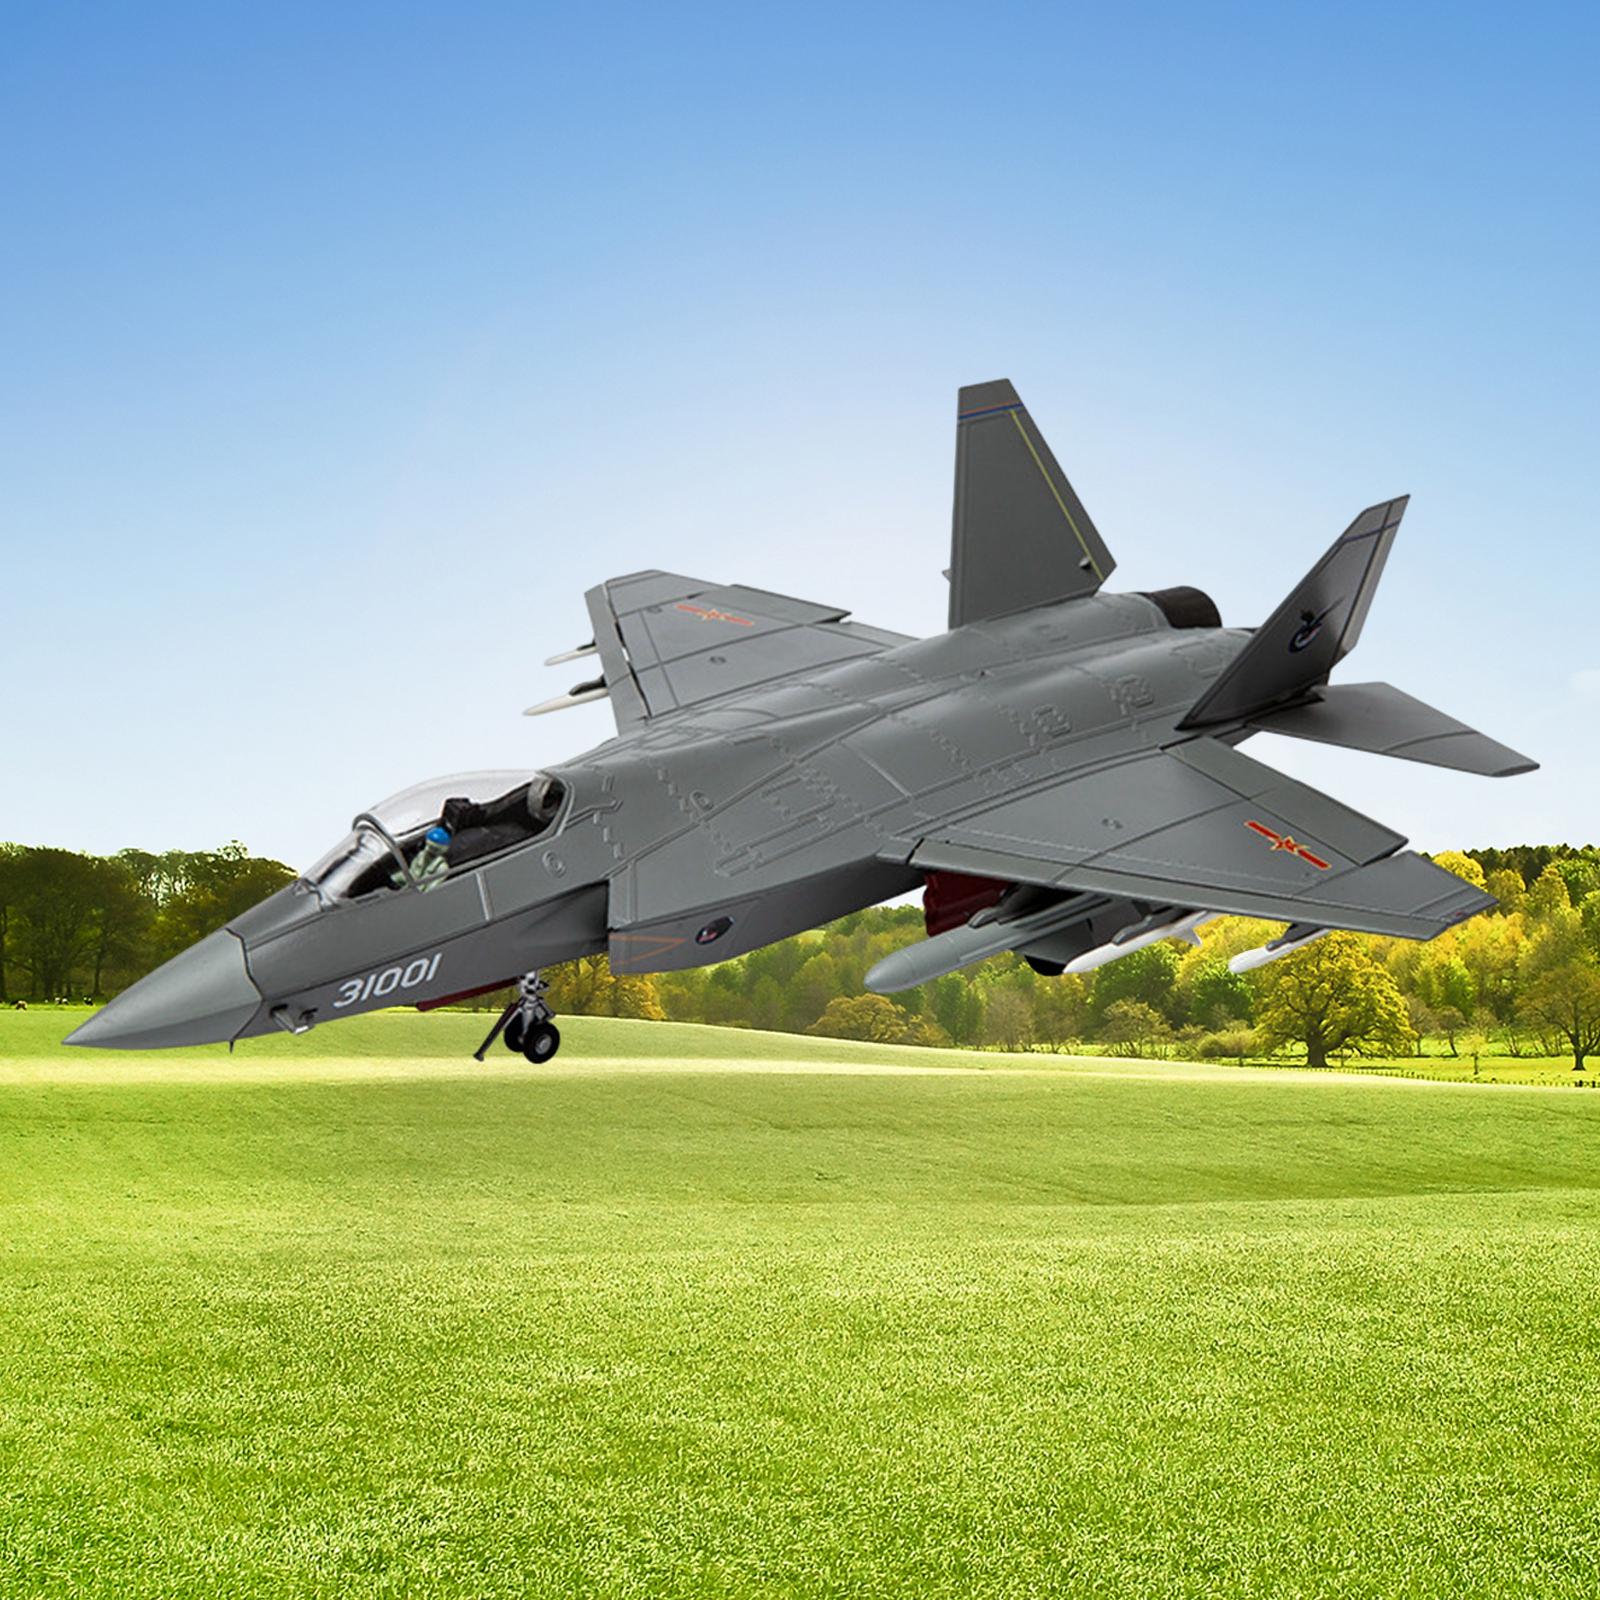 J-31 Plane Mode Chinese Air Force Miniature Toys Simulation Aircraft Model Diecast Plane Alloy Plane Holay Gifts Decoration